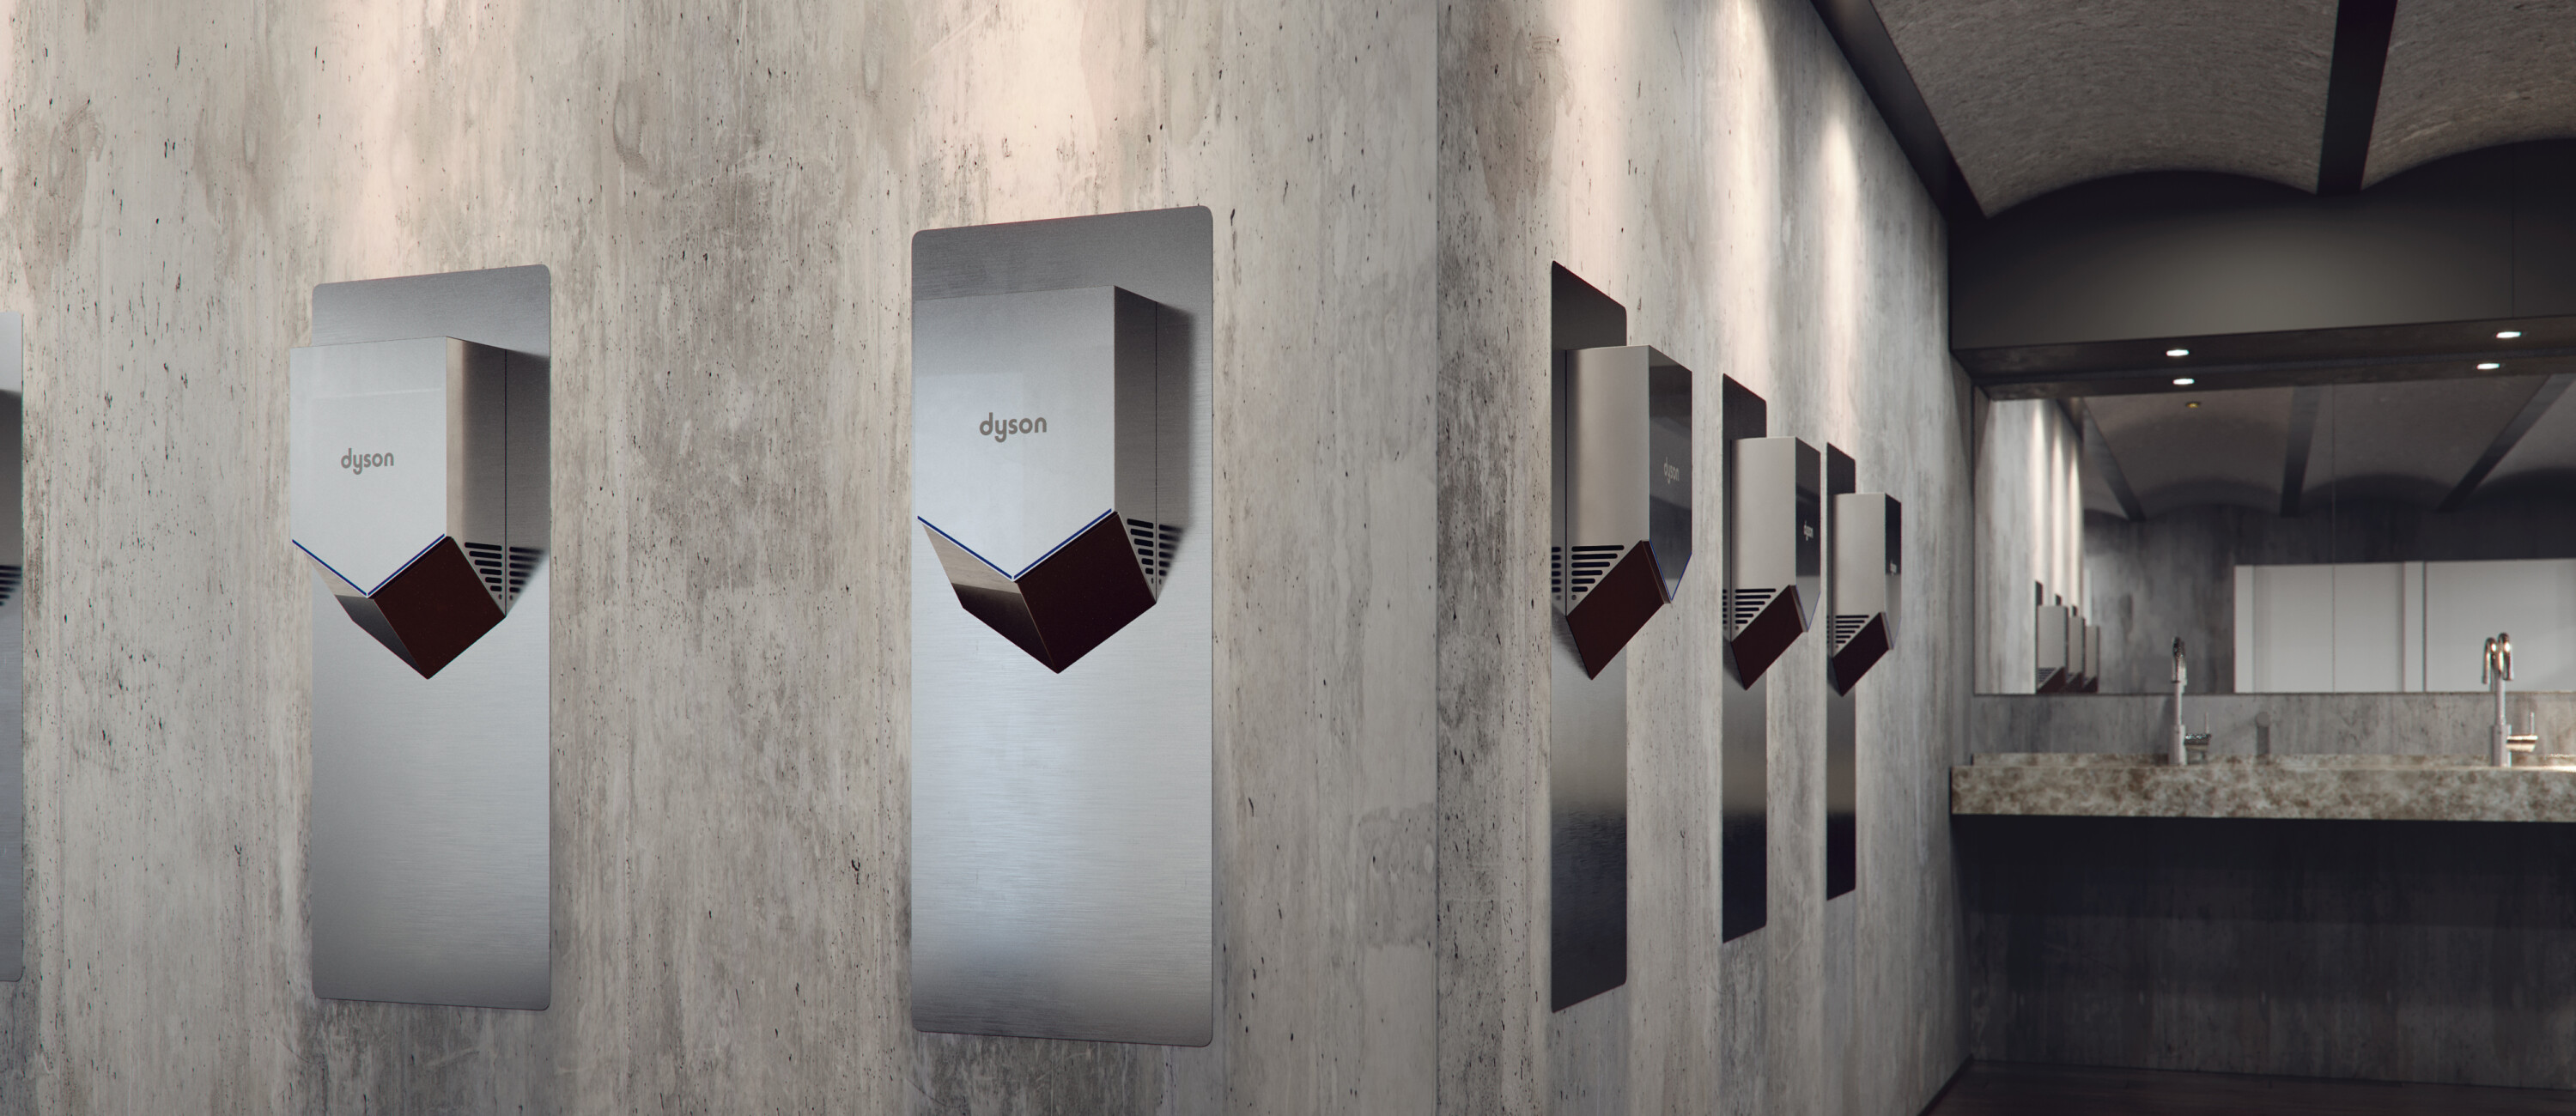 5 Dyson Airblade Hand Dryers model HU02 hanging next to each other on a stone wall, in a modern looking washroom.